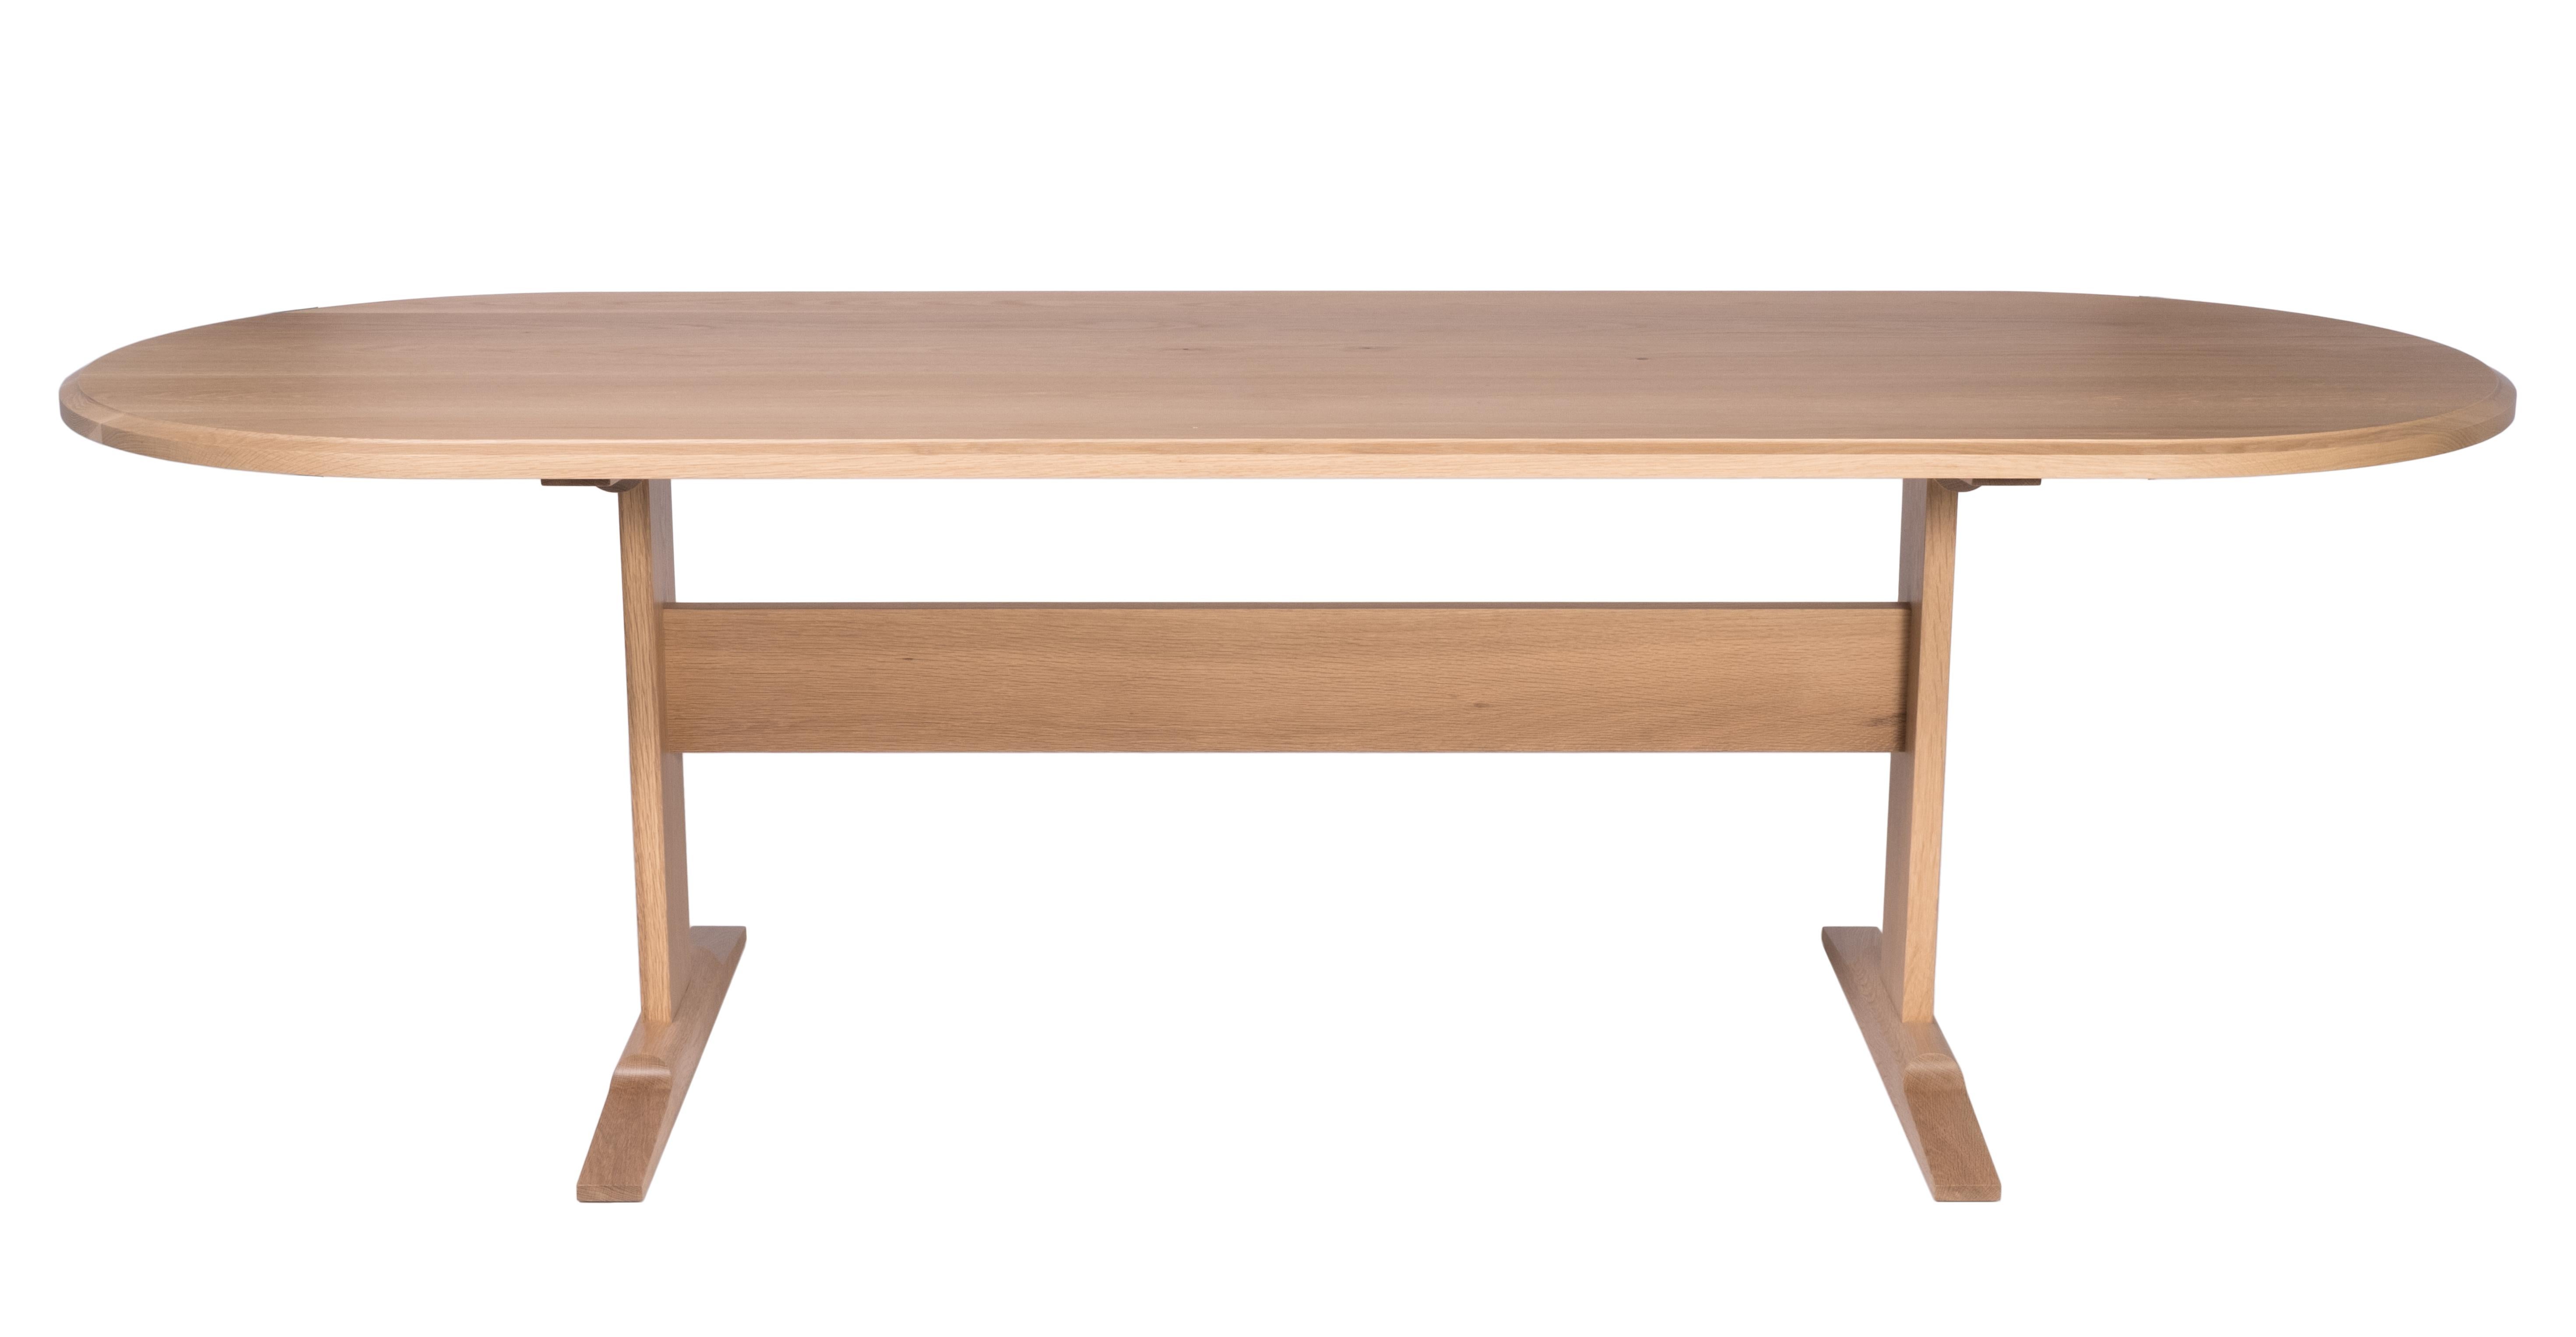 Hand-Crafted Spade Dining Table by Tretiak Works, Modern Contemporary White Oak Trestle For Sale